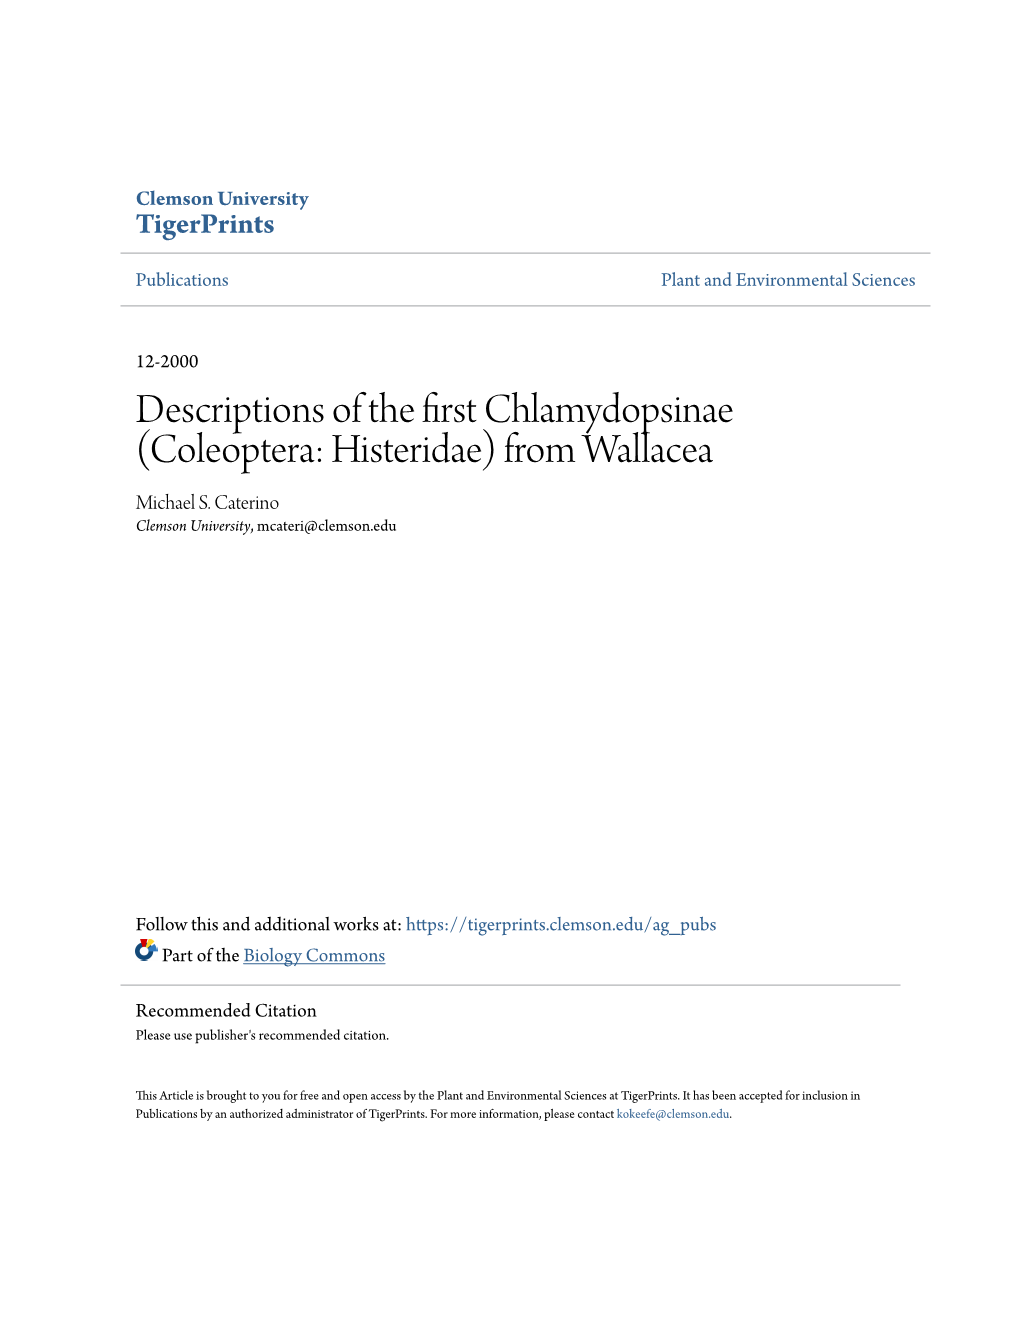 Descriptions of the First Chlamydopsinae (Coleoptera: Histeridae) from Wallacea Michael S